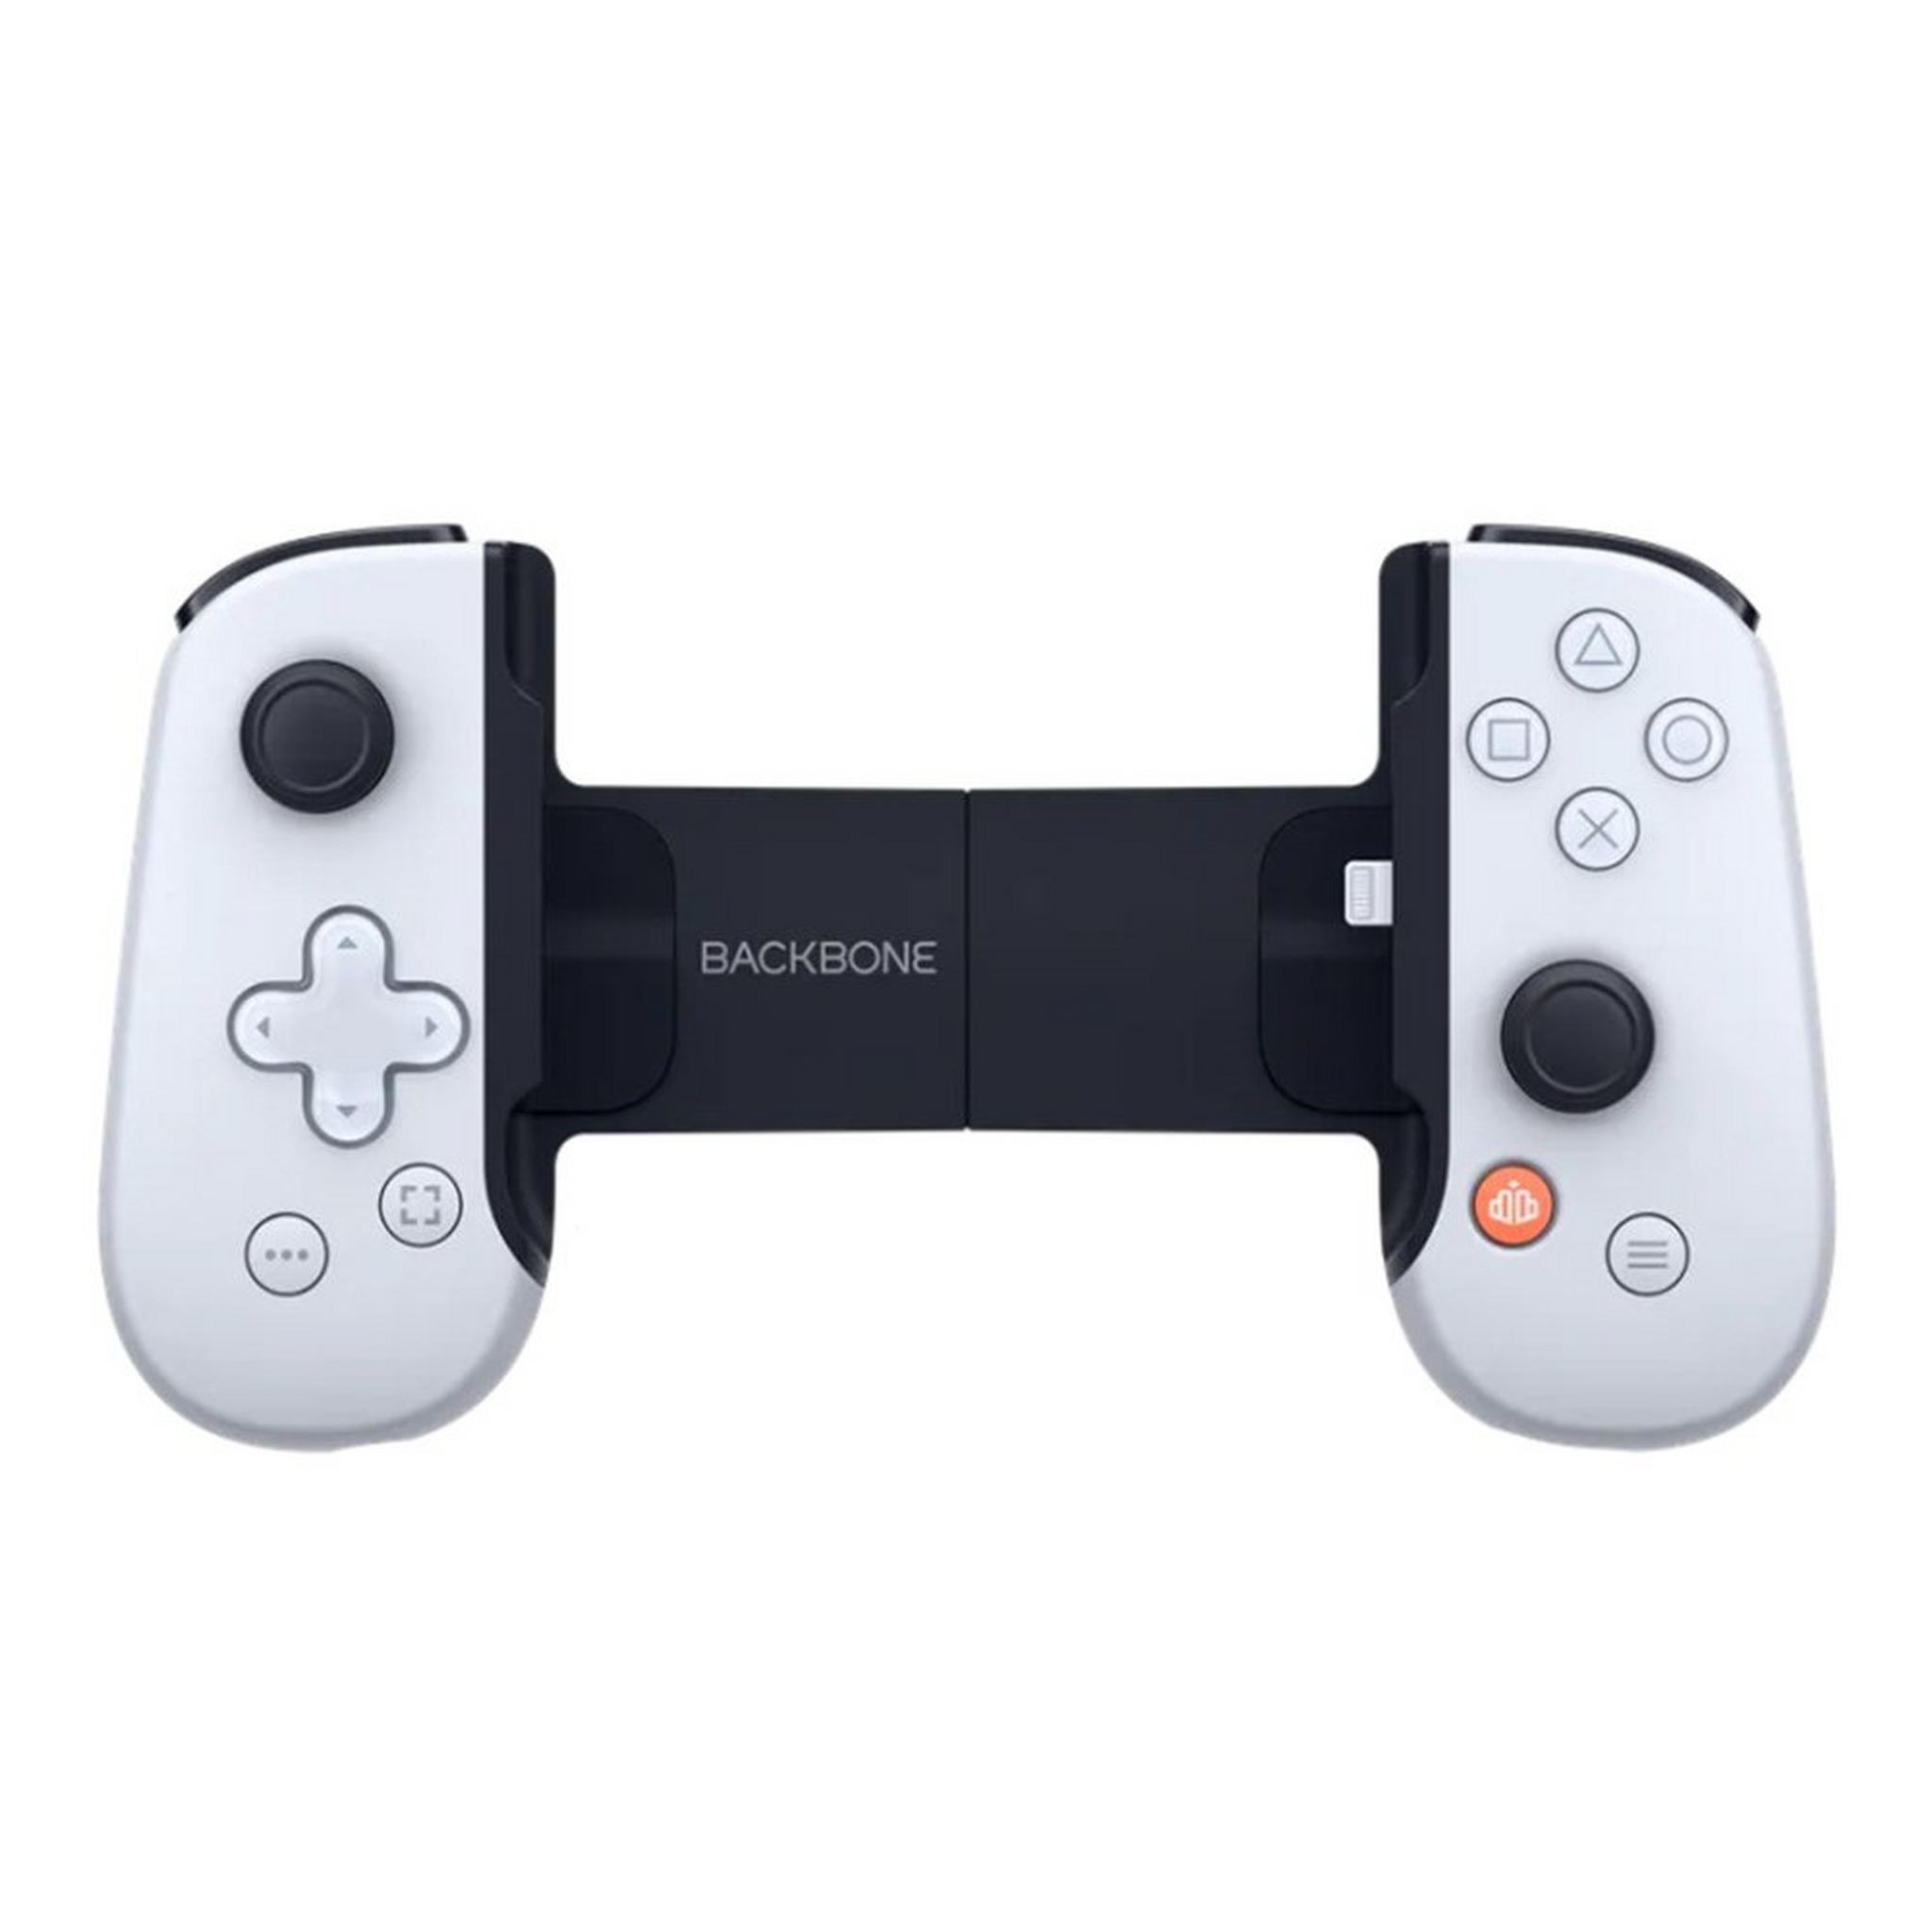 BACKBONE One Handheld iPhone Game Controller for PlayStation, BB-02-W-S – White